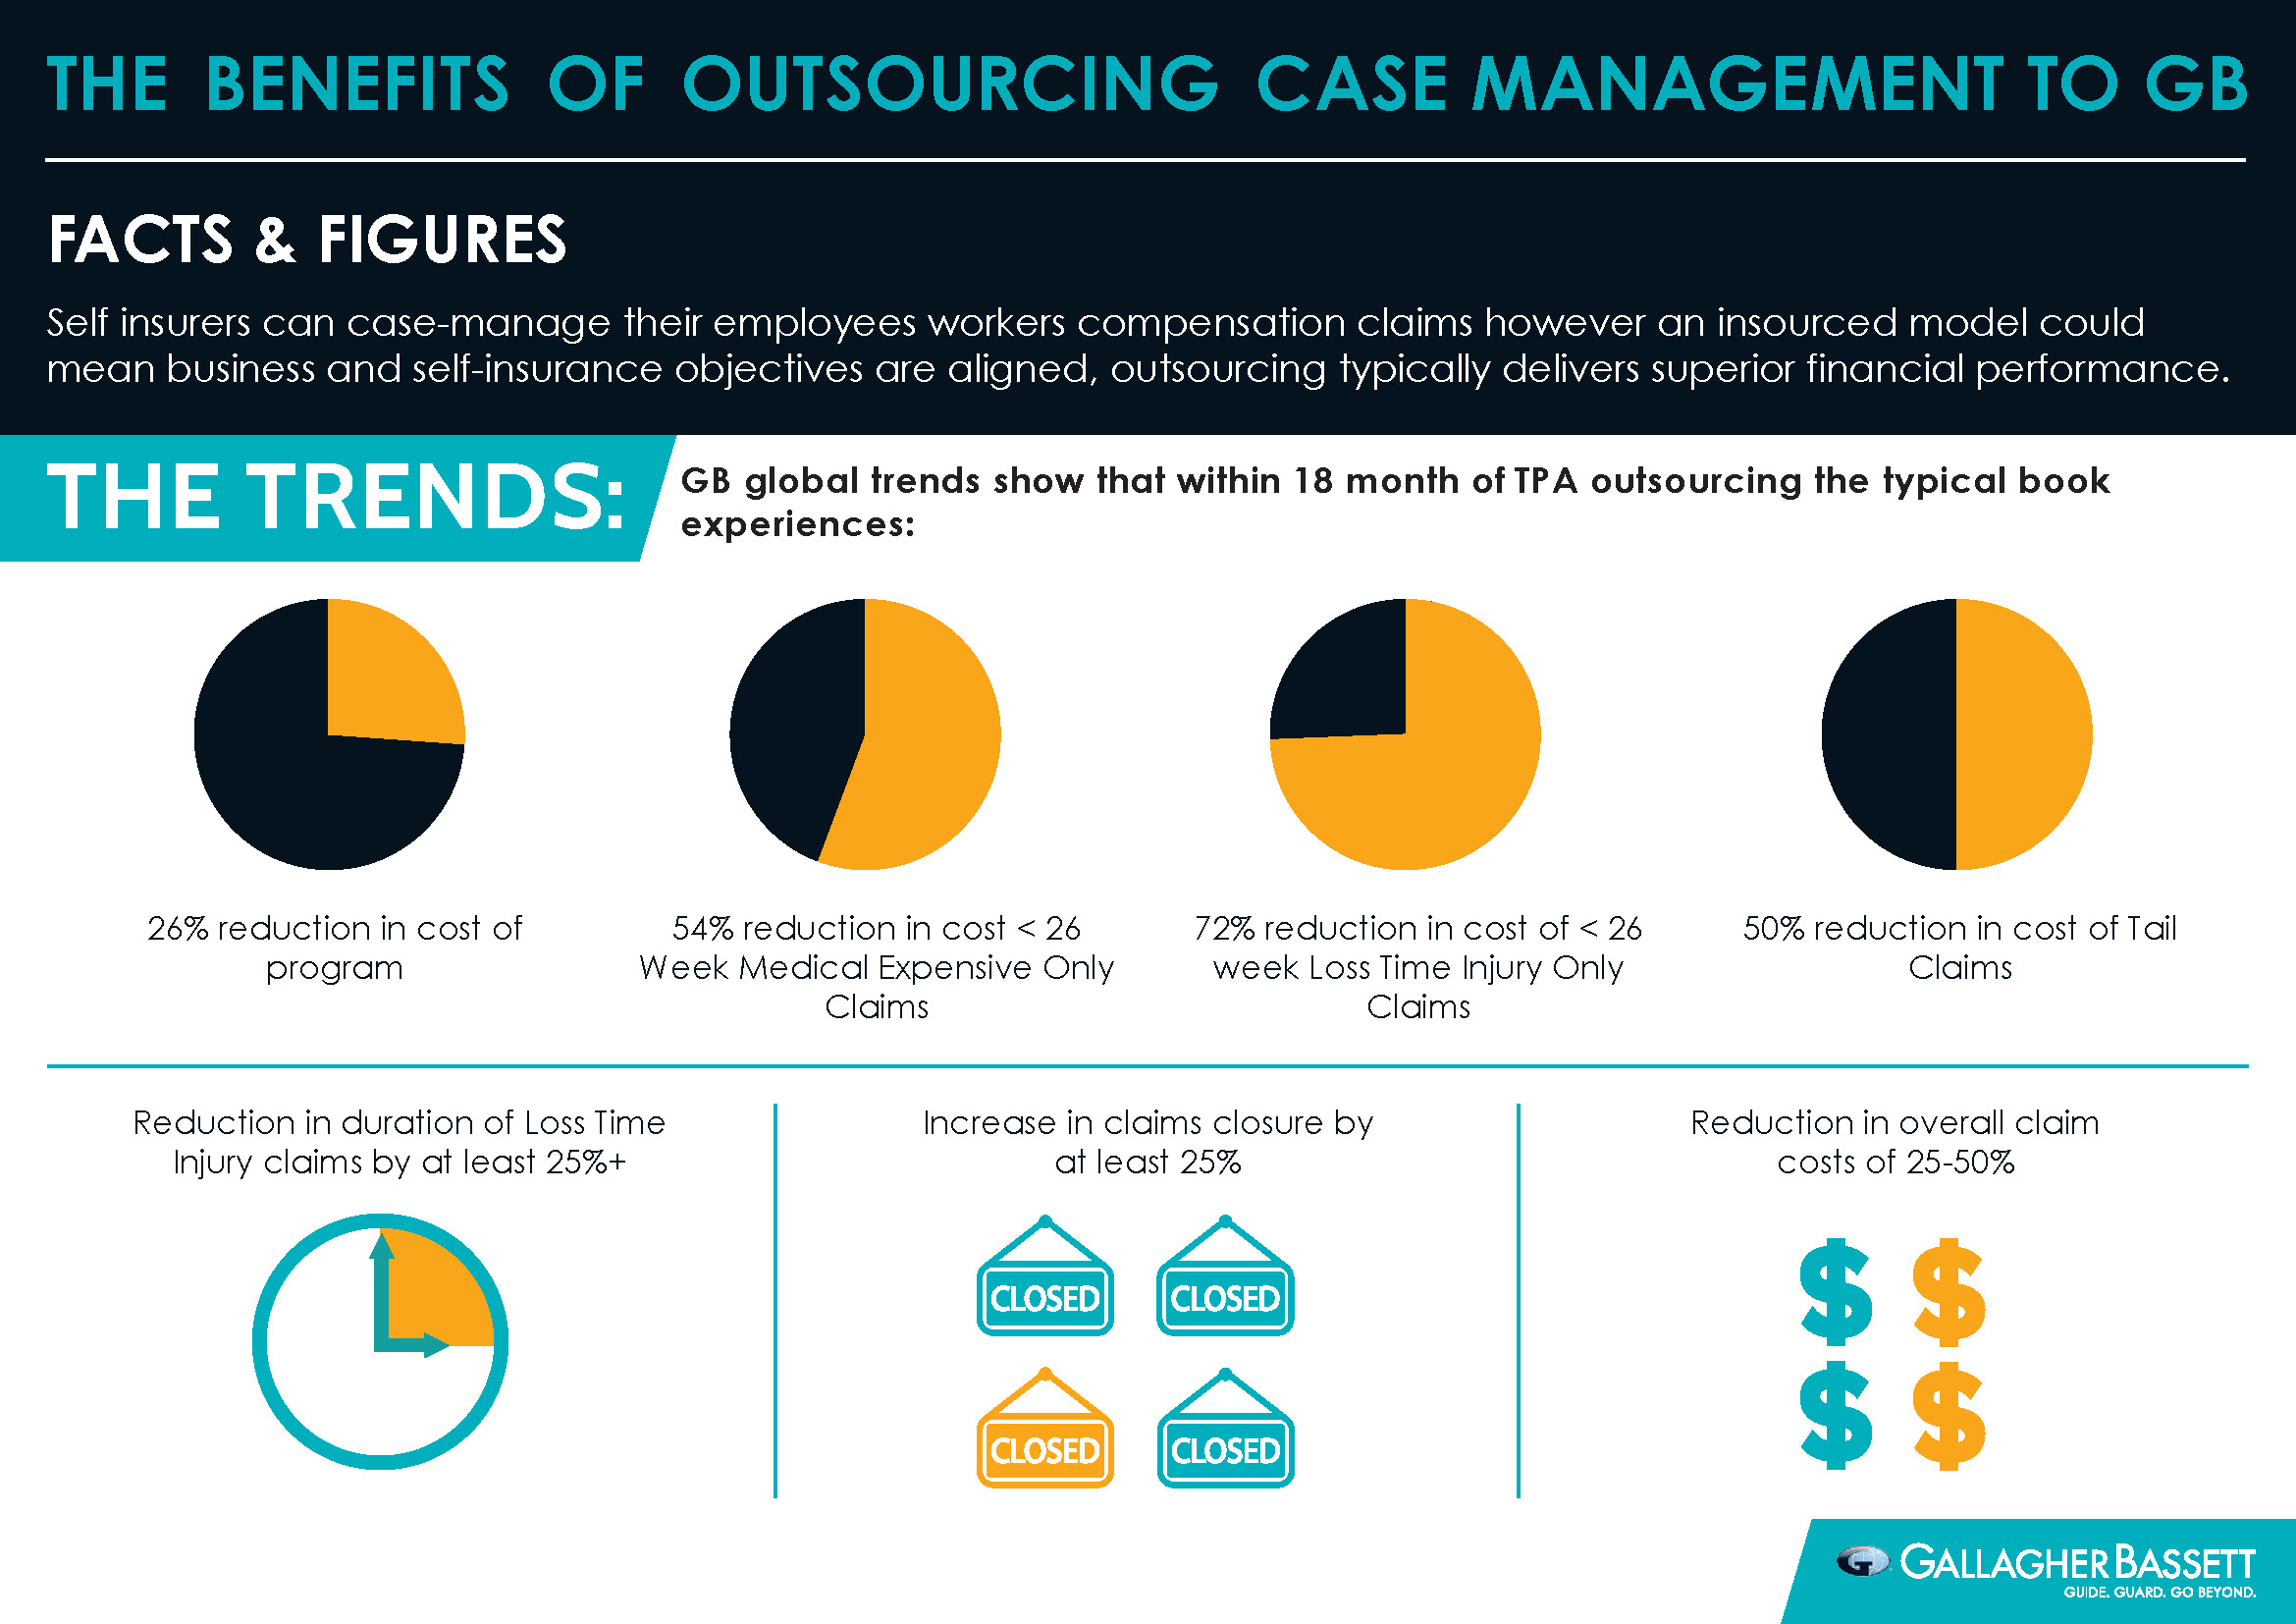 The Benefits of Outsourcing Case Managmenet to GB